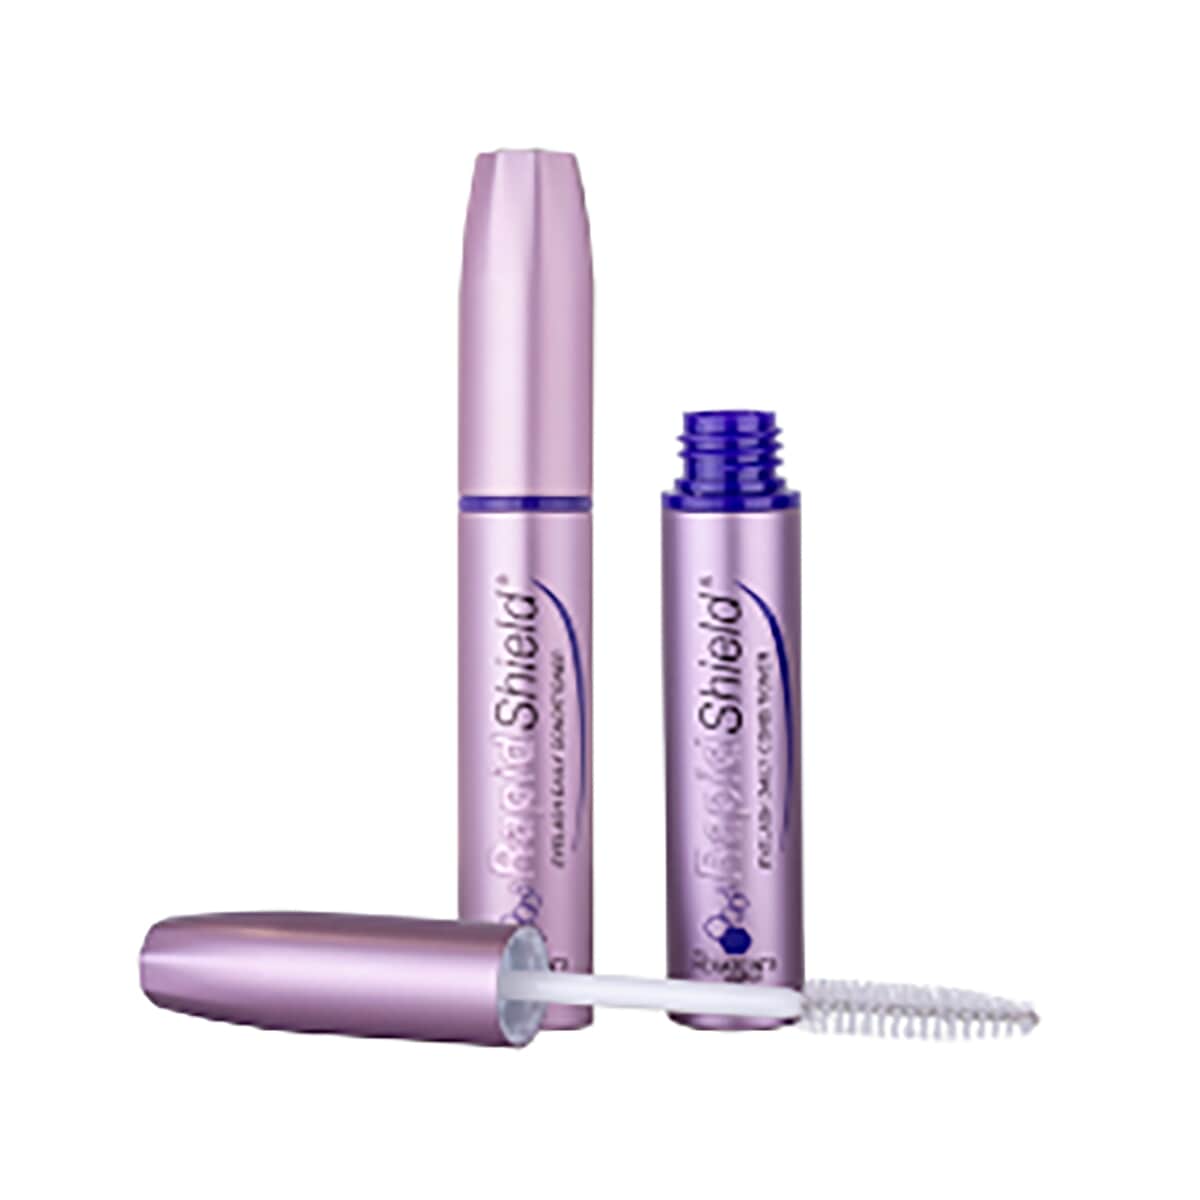 2 Piece Set RapidShield Eyelash Daily Conditioners image number 0